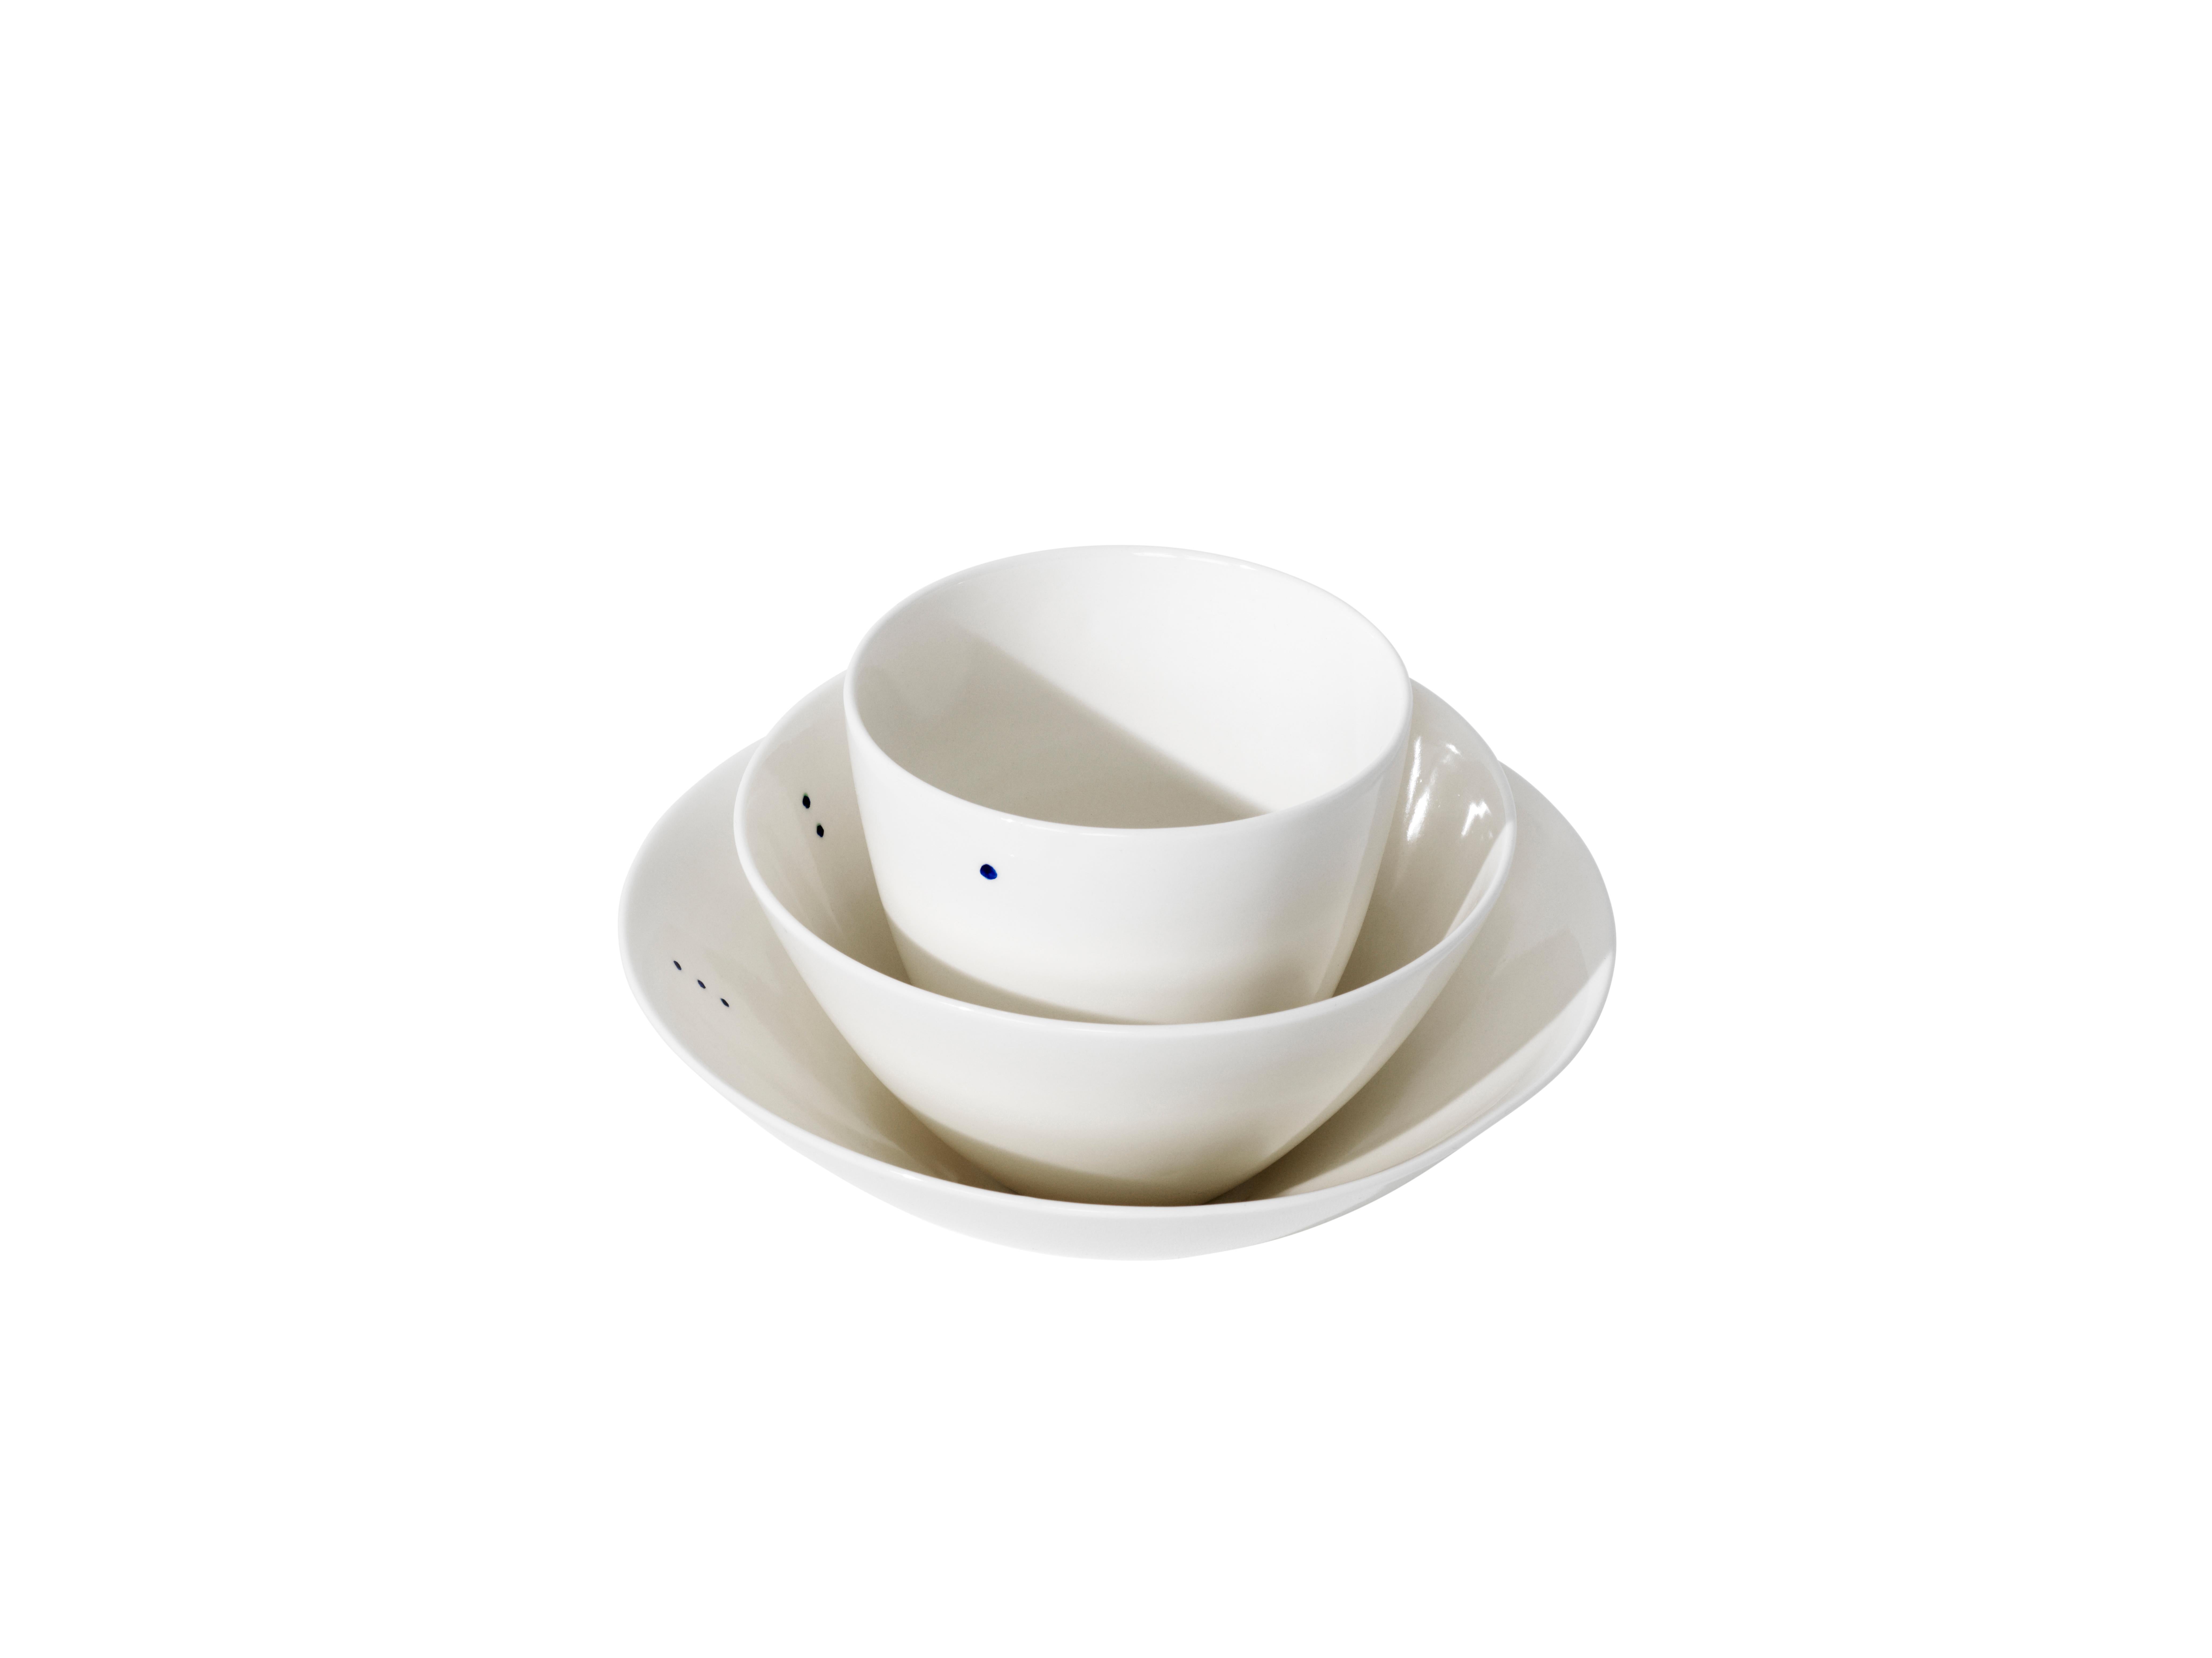 SHIRO is a collection of simple and sculptural bowls that are designed to contain all kinds of foods and drinks. Each of the three shapes comes in two sizes – a small and a large. 

Shiro is the Japanese word for white. The little indigo blue dot is